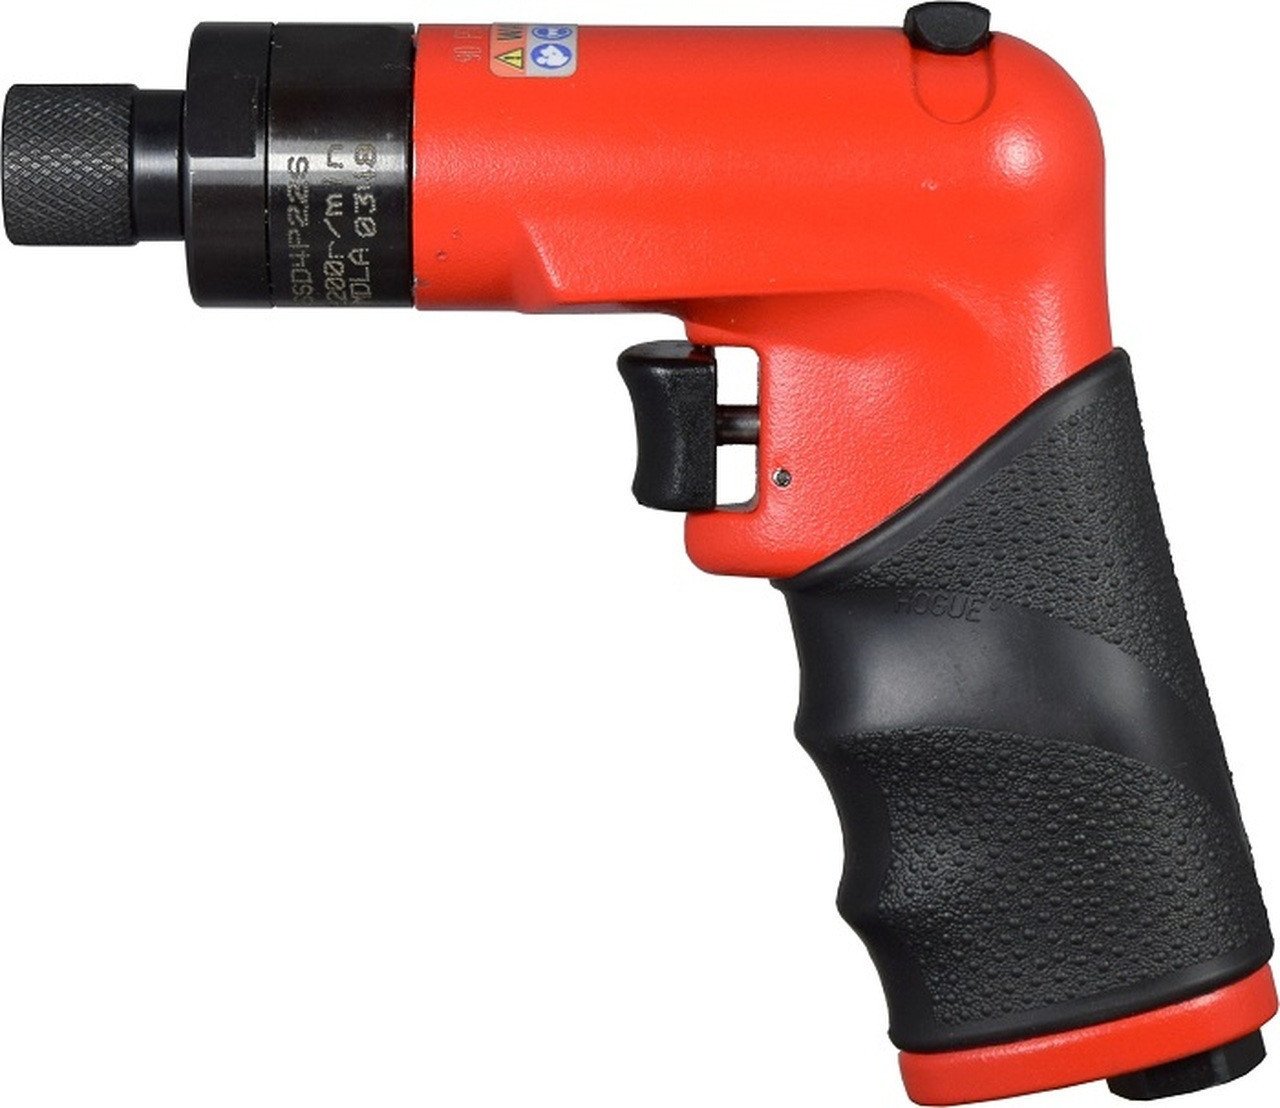 Sioux Tools SSD4P5S Stall Pistol Grip Screwdriver | Shuttle Reverse | 0.4 HP | 500 RPM | 95 in.-lb. Max Torque